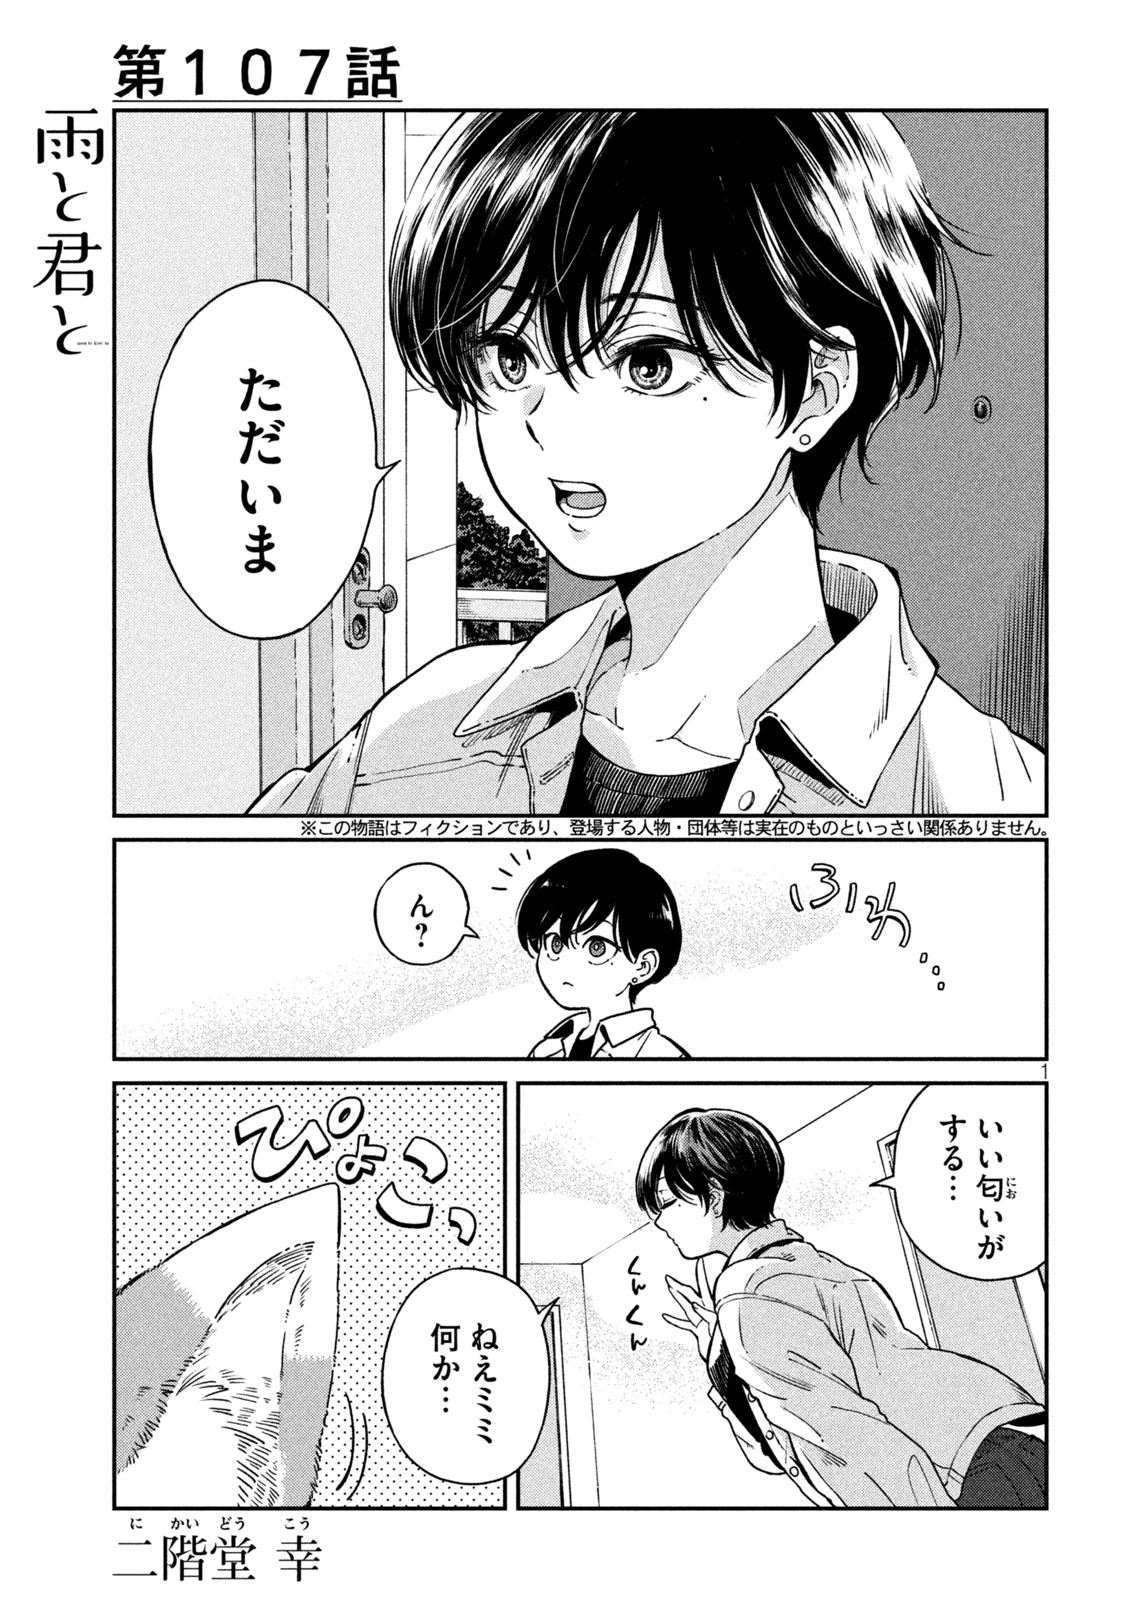 Ame to Kimi to - Chapter 107 - Page 1